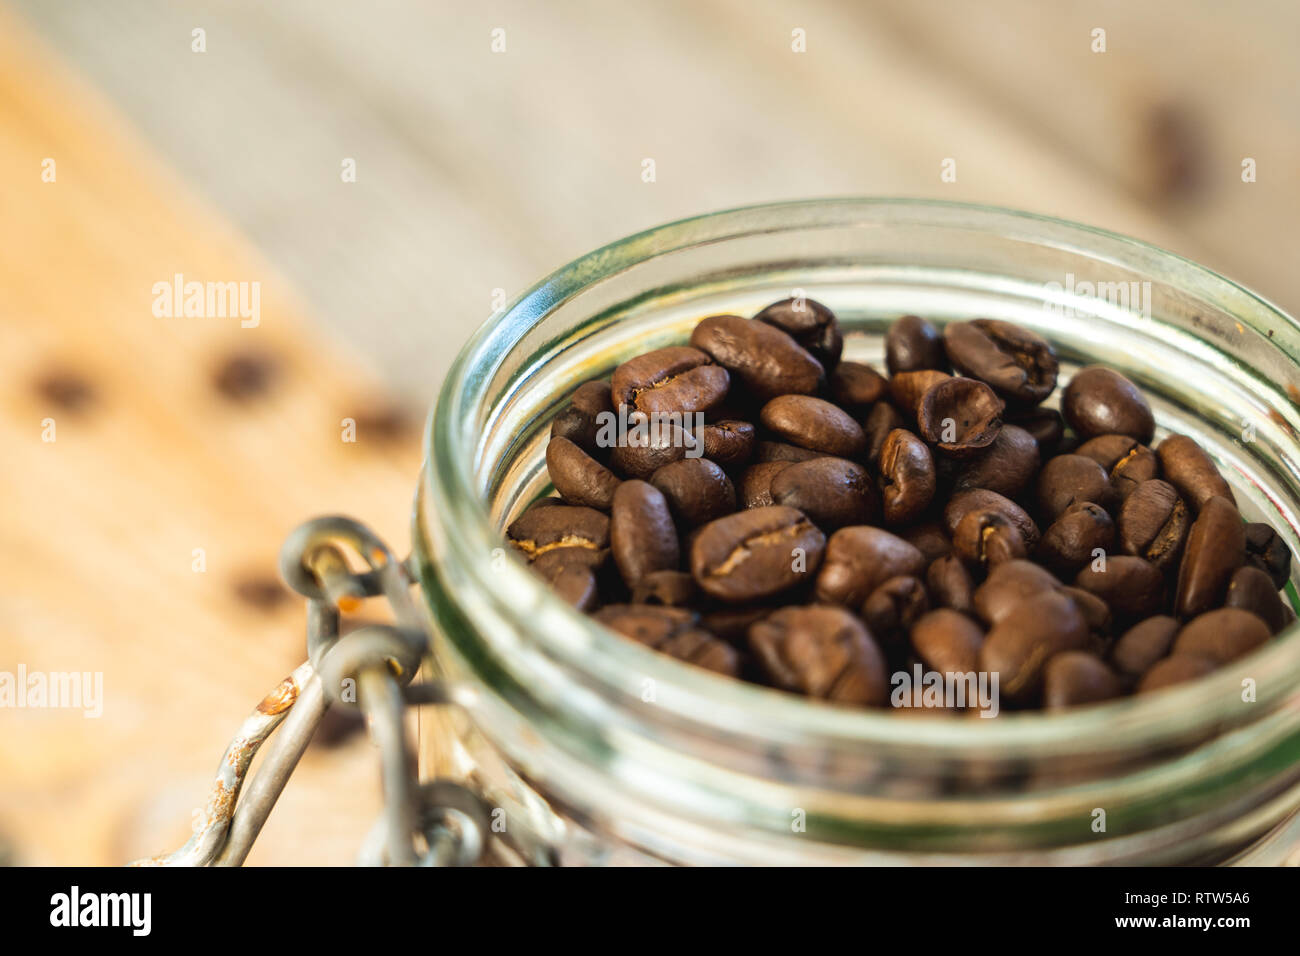 Top view of a glass jar filled with coffee beans on rustic wooden boards Stock Photo